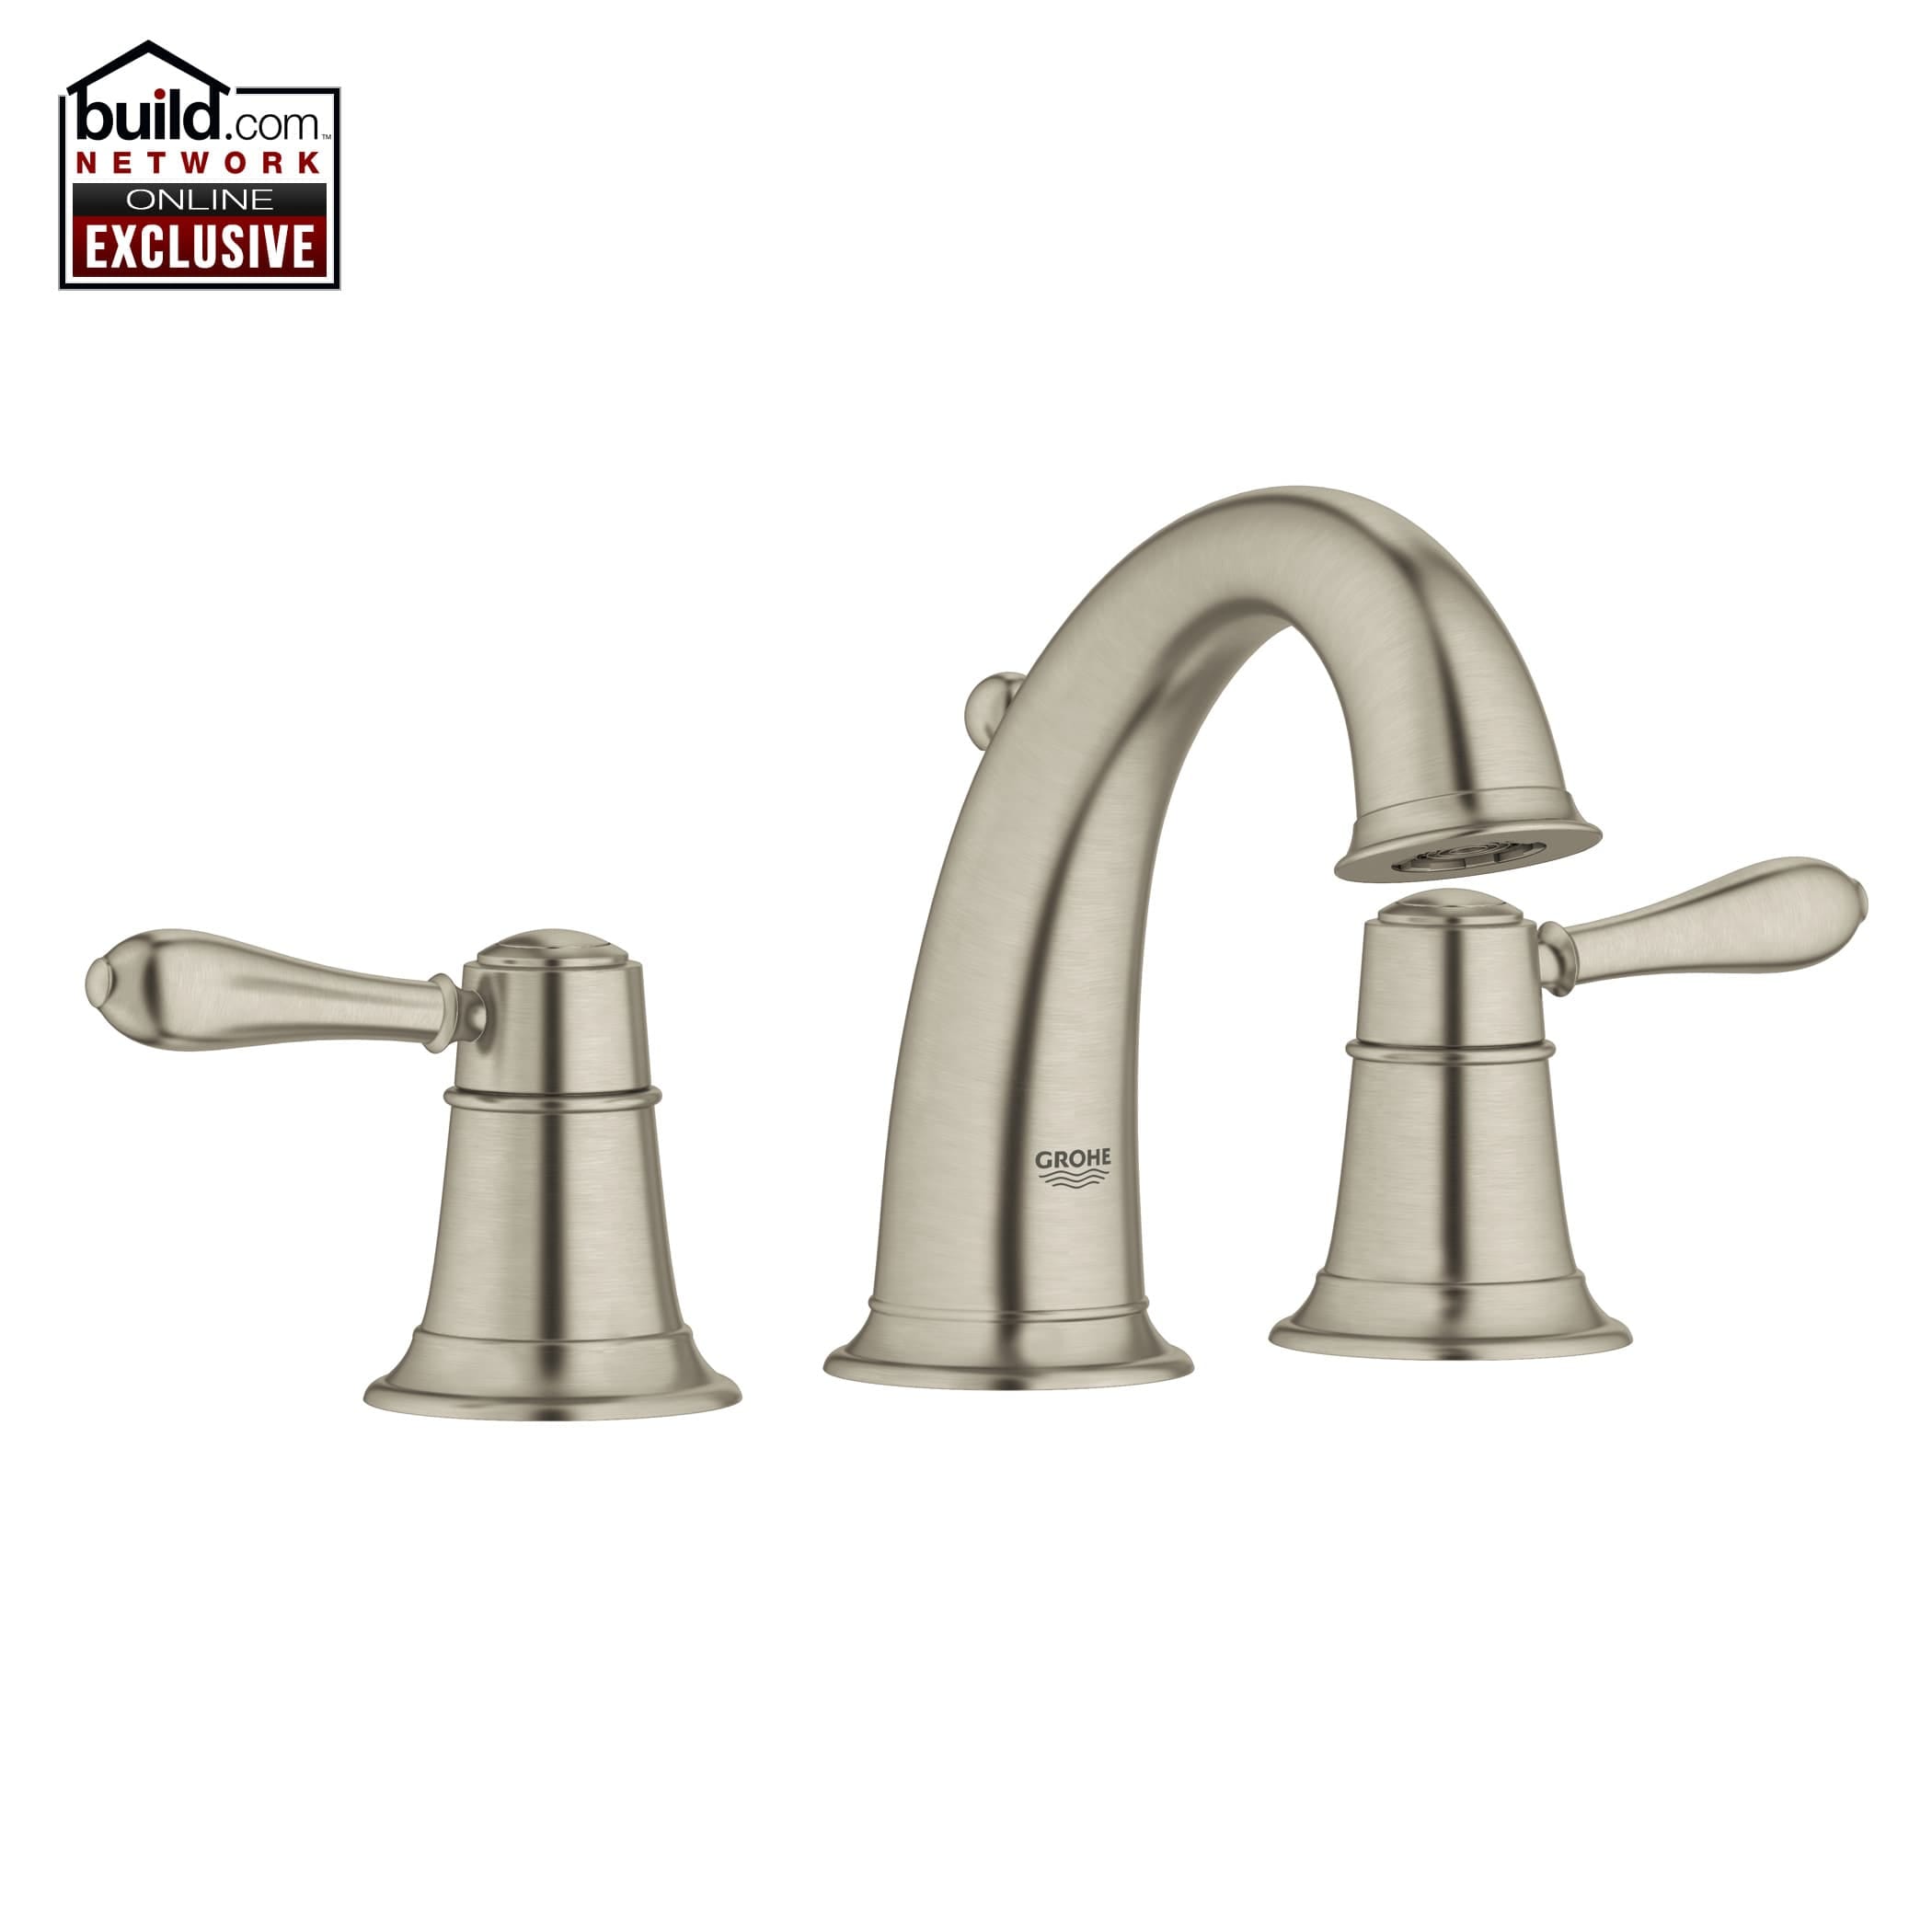 Grohe 20423en1 Brushed Nickel Fairborn Traditional Widespread Bathroom Faucet With Silkmove Ceramic Disc Cartridge Free Metal Drain Assembly Purchase Faucetdirect Com - Grohe Bathroom Sink Faucet Cartridge